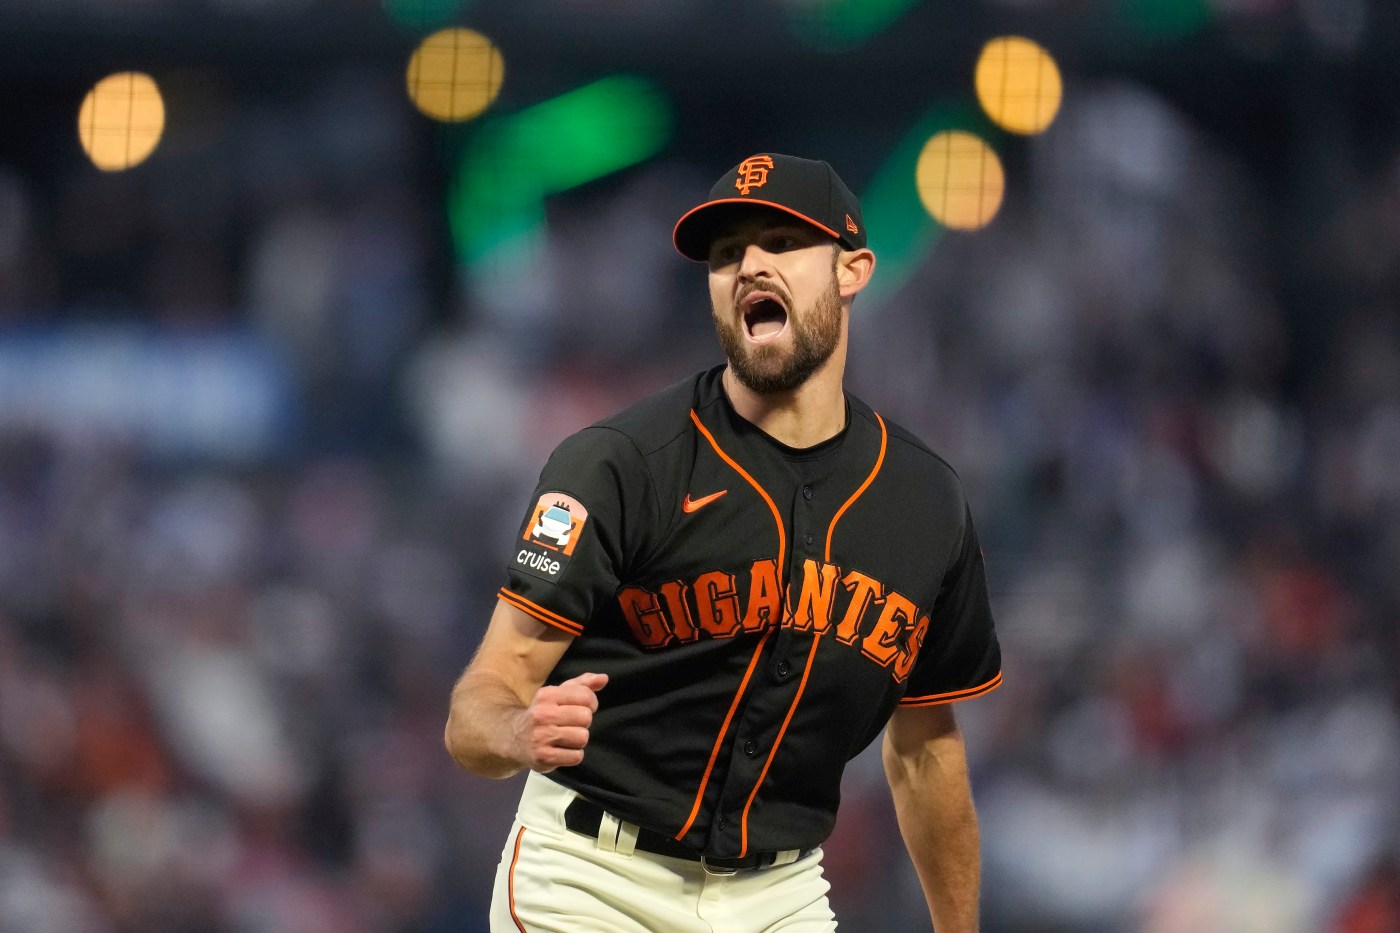 tristan-beck-cleared-to-throw-again-after-aneurysm,-plus-updates-on-sf-giants’-other-injured-pitchers